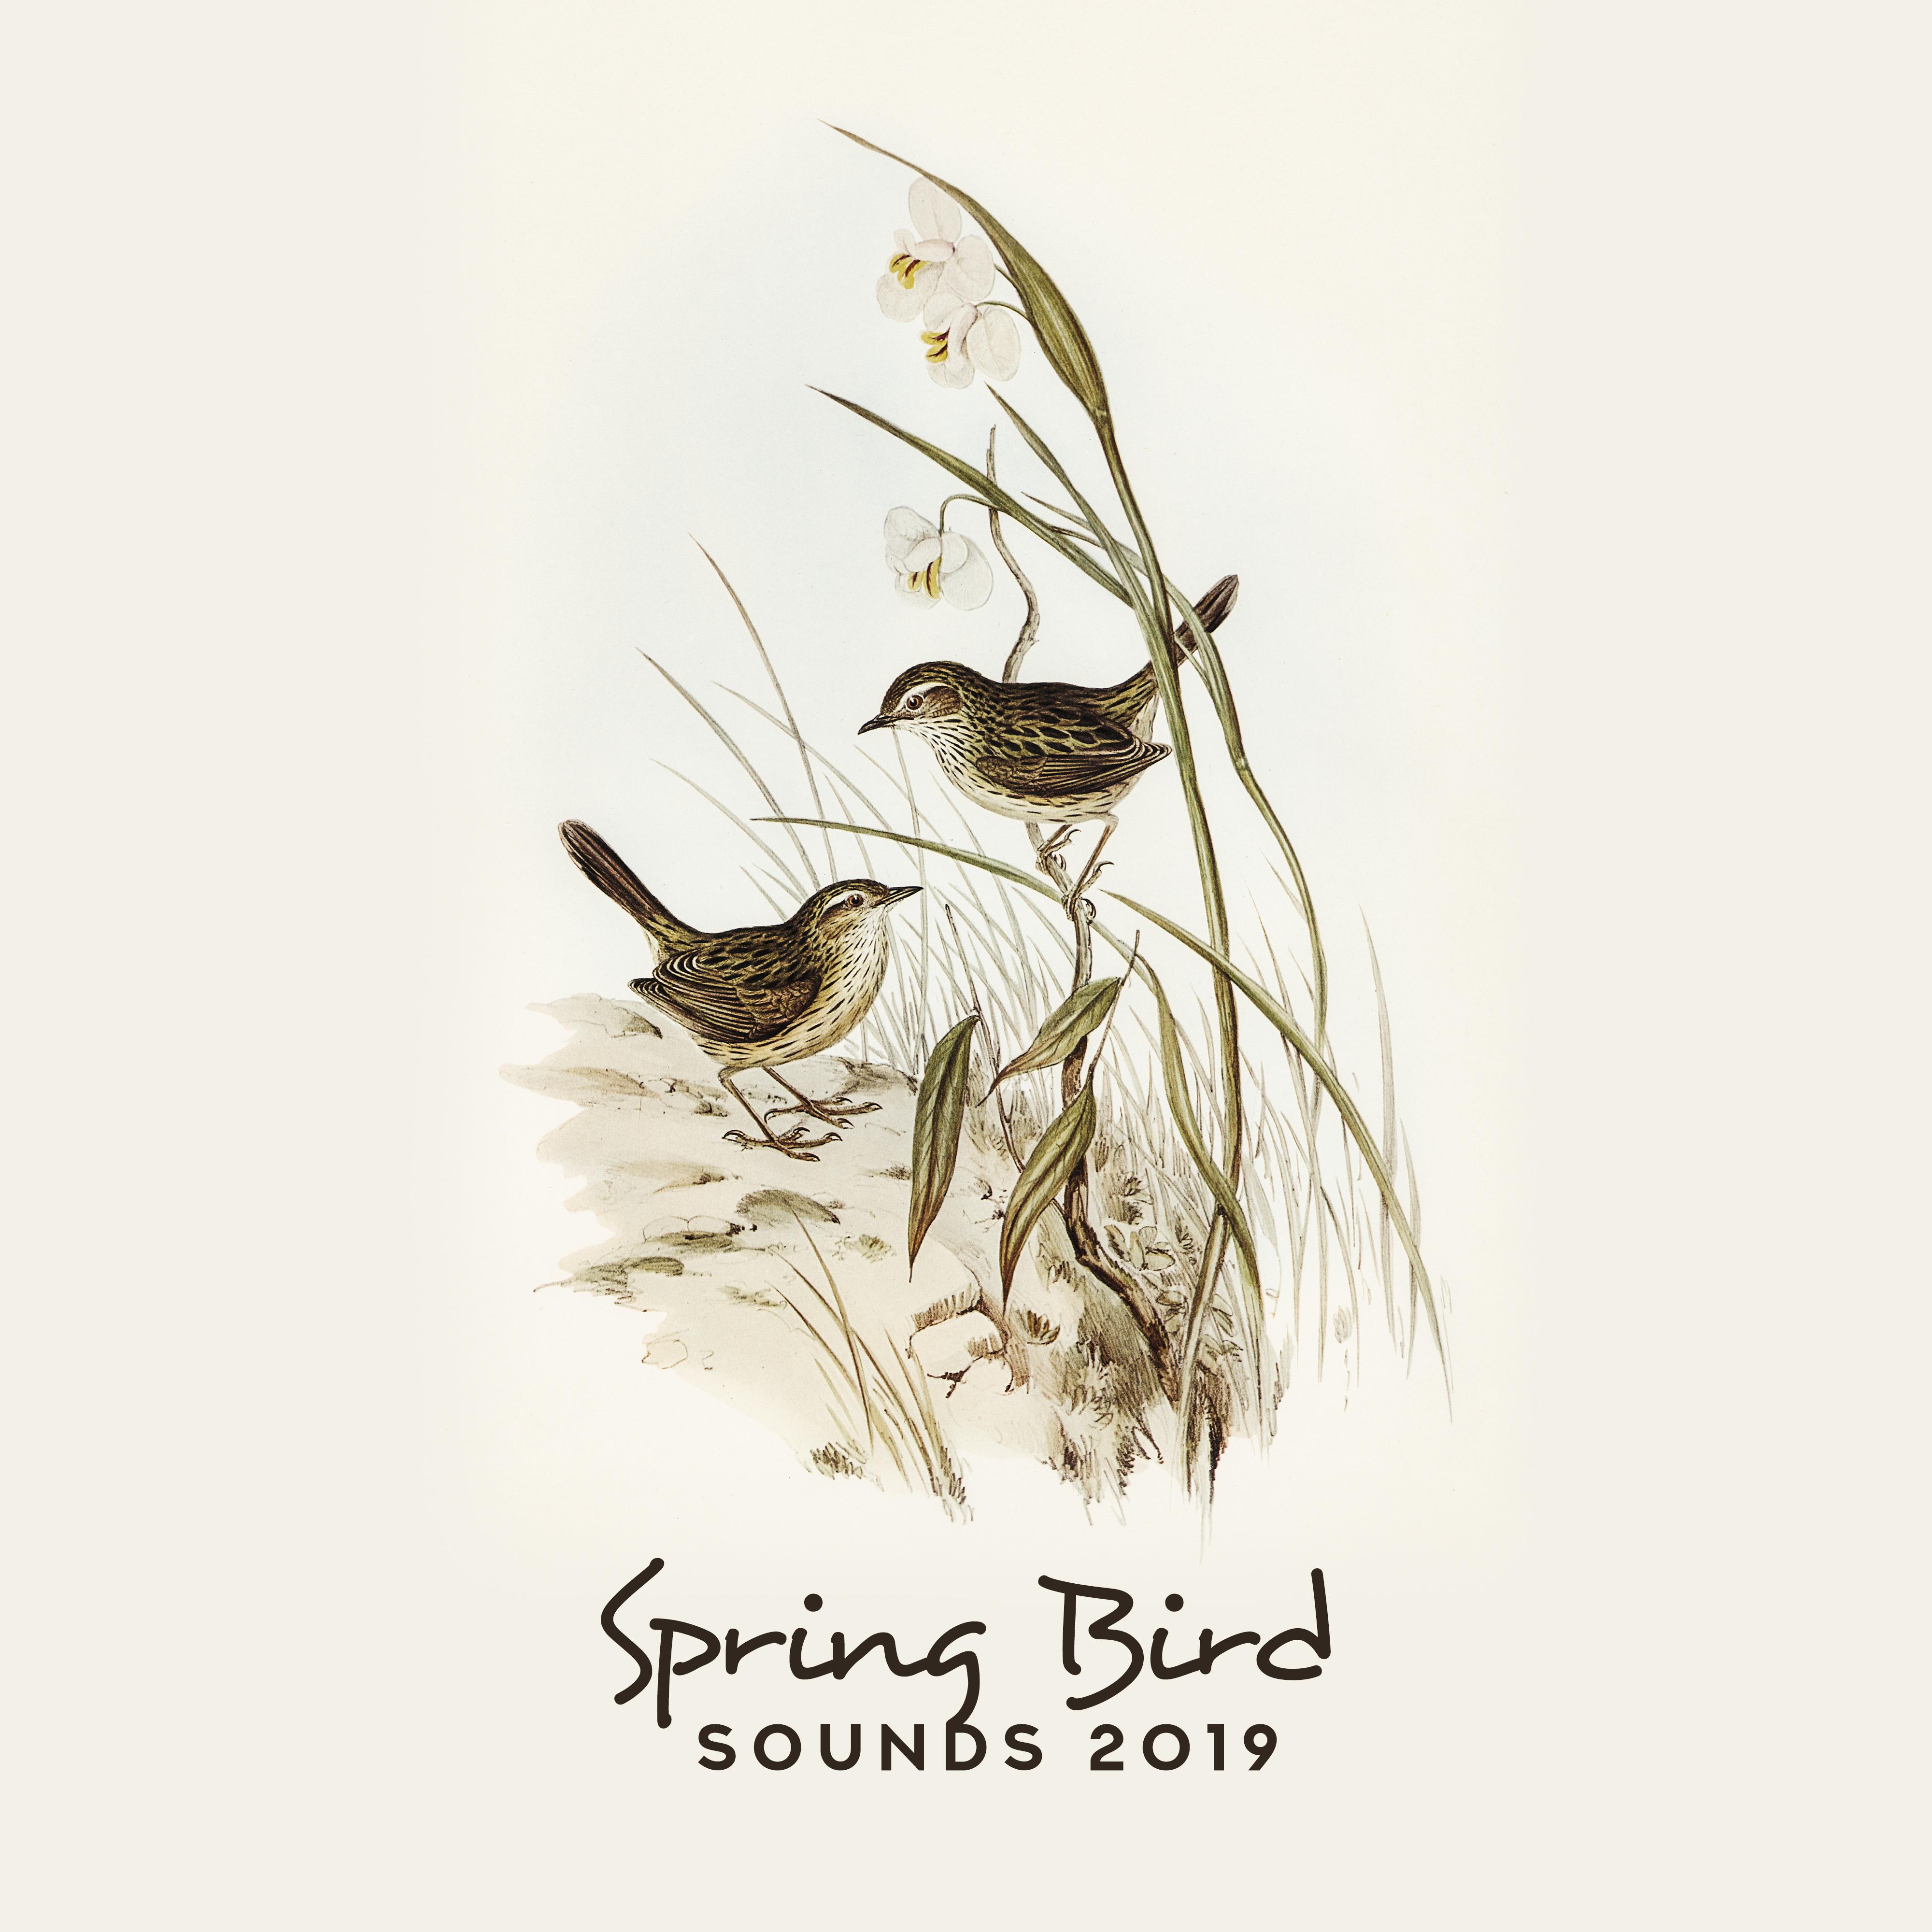 Spring Bird Sounds 2019: 15 Relaxing New Age Songs with Piano, Birds & Nature Sounds for Total Calm Down, Stress Relief, Relax After Tough Day, Inner Calmness, Good Sleep Melodies, Meditation with Nature